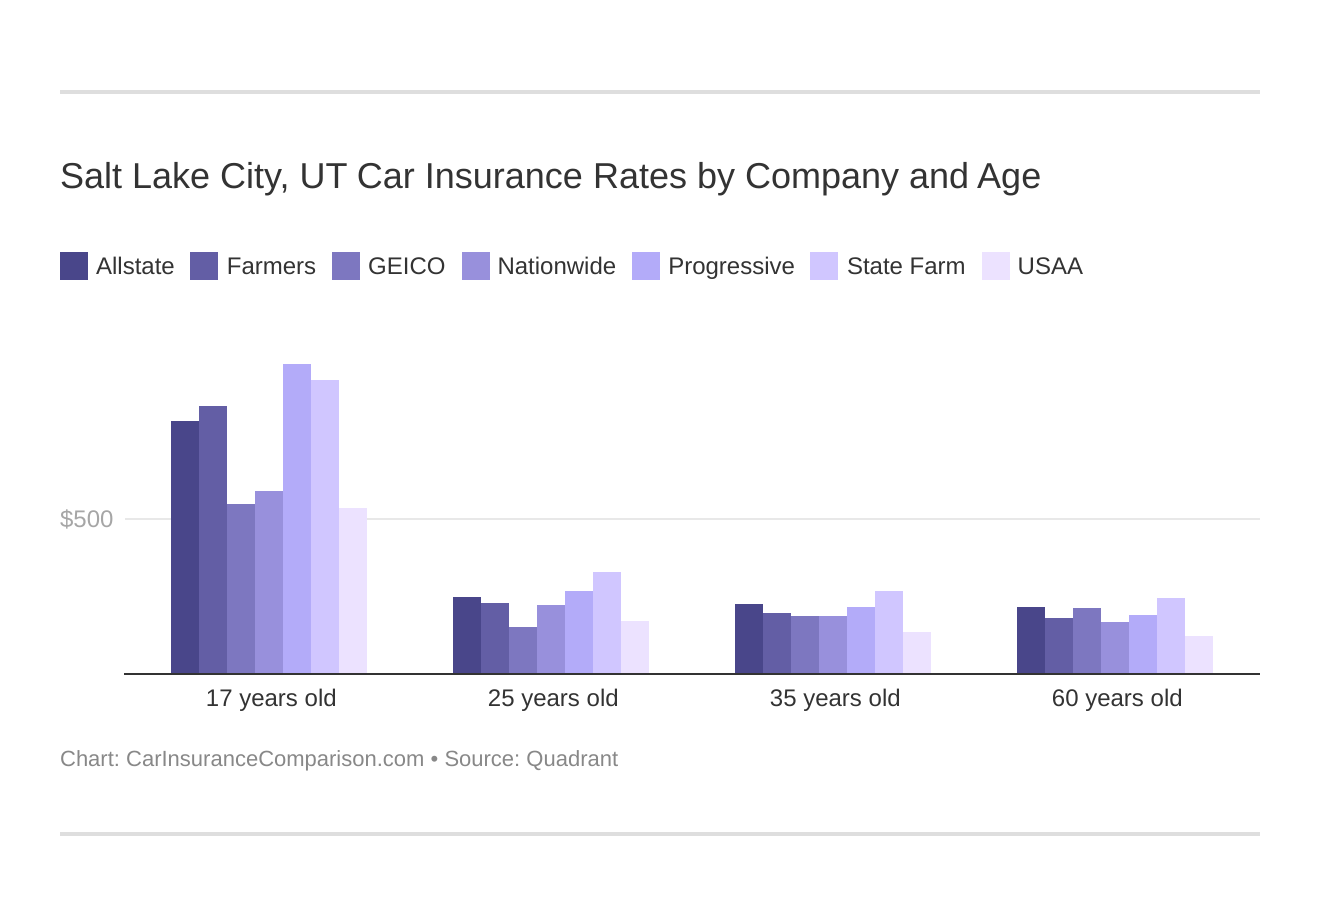 Salt Lake City, UT Car Insurance Rates by Company and Age